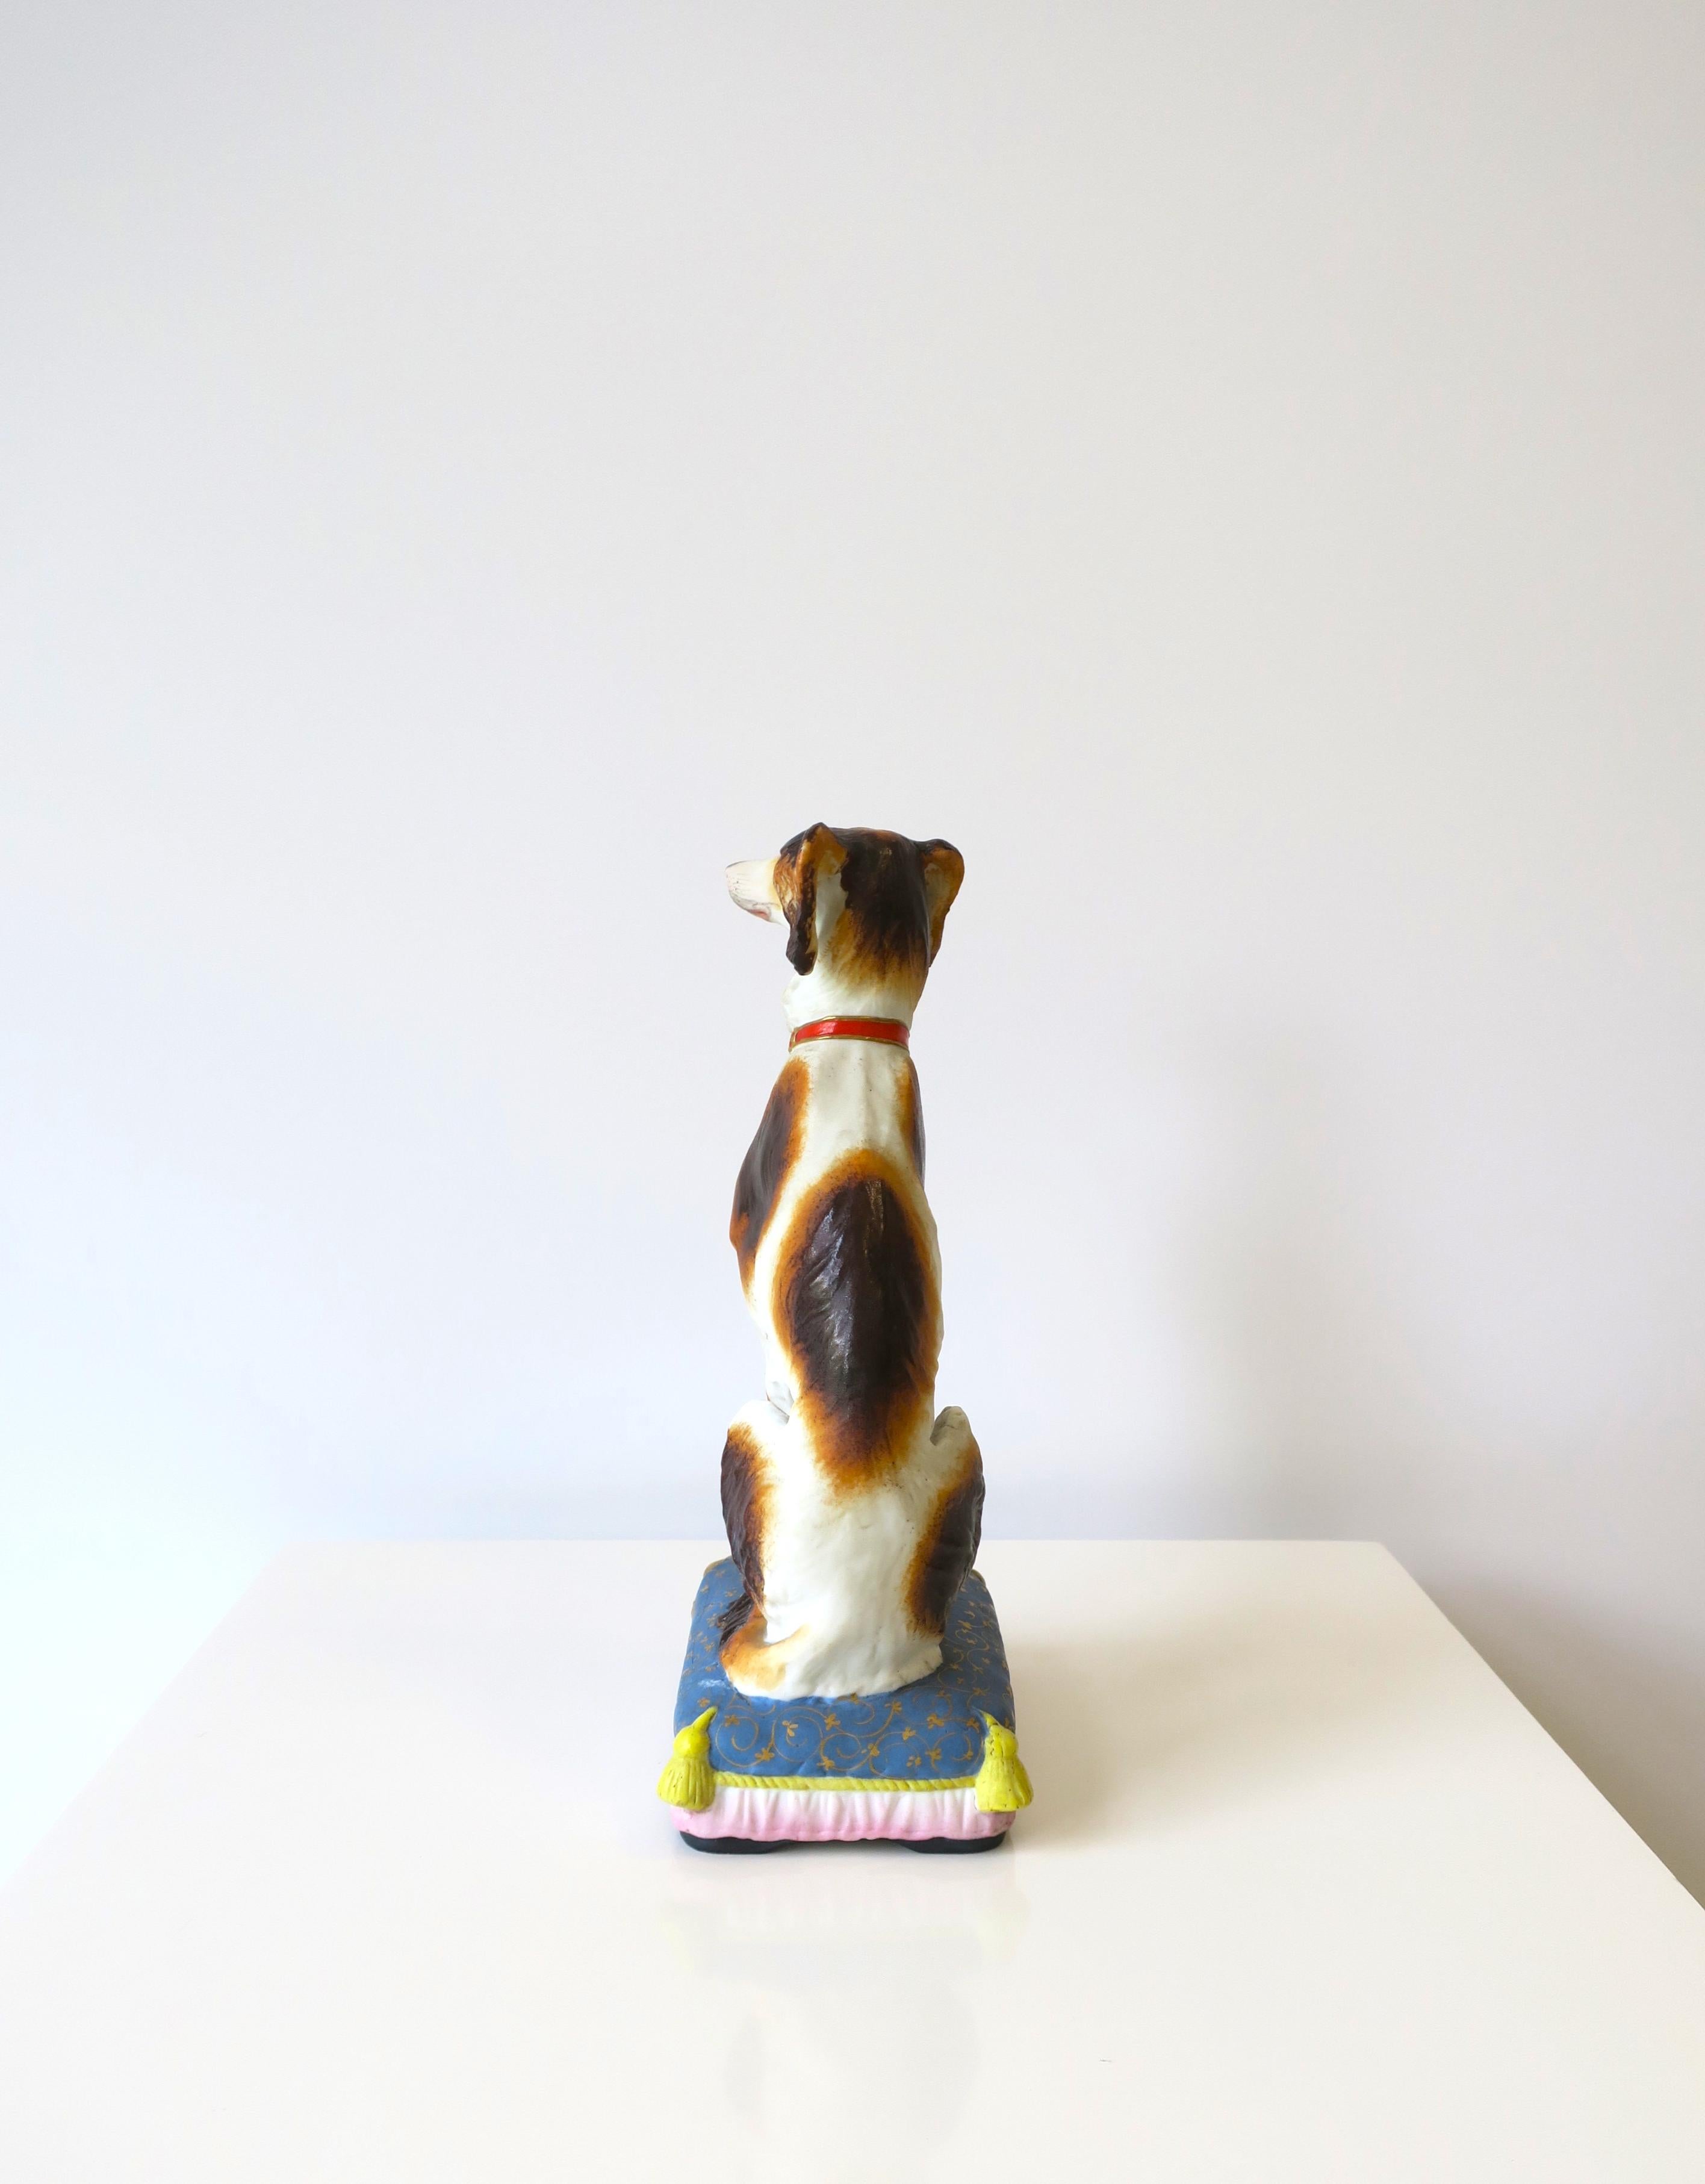 Porcelain Dog on Pillow with Tassels Decorative Object, circa Mid-20th Century For Sale 5